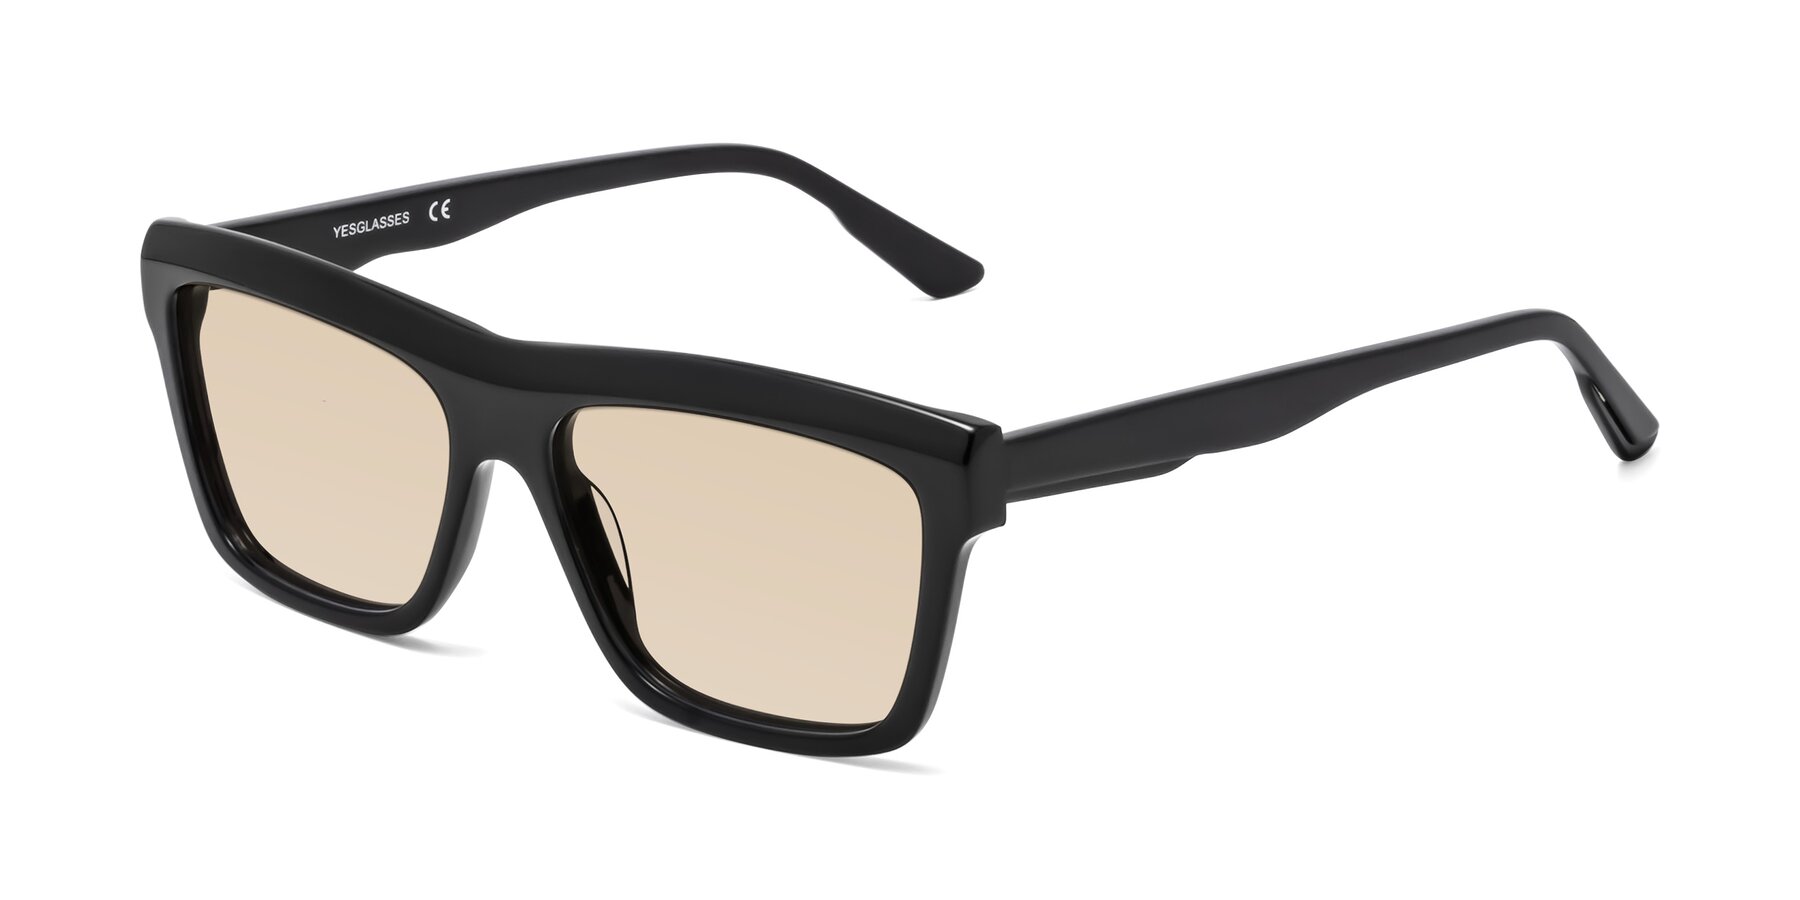 Angle of 1481 in Black with Light Brown Tinted Lenses